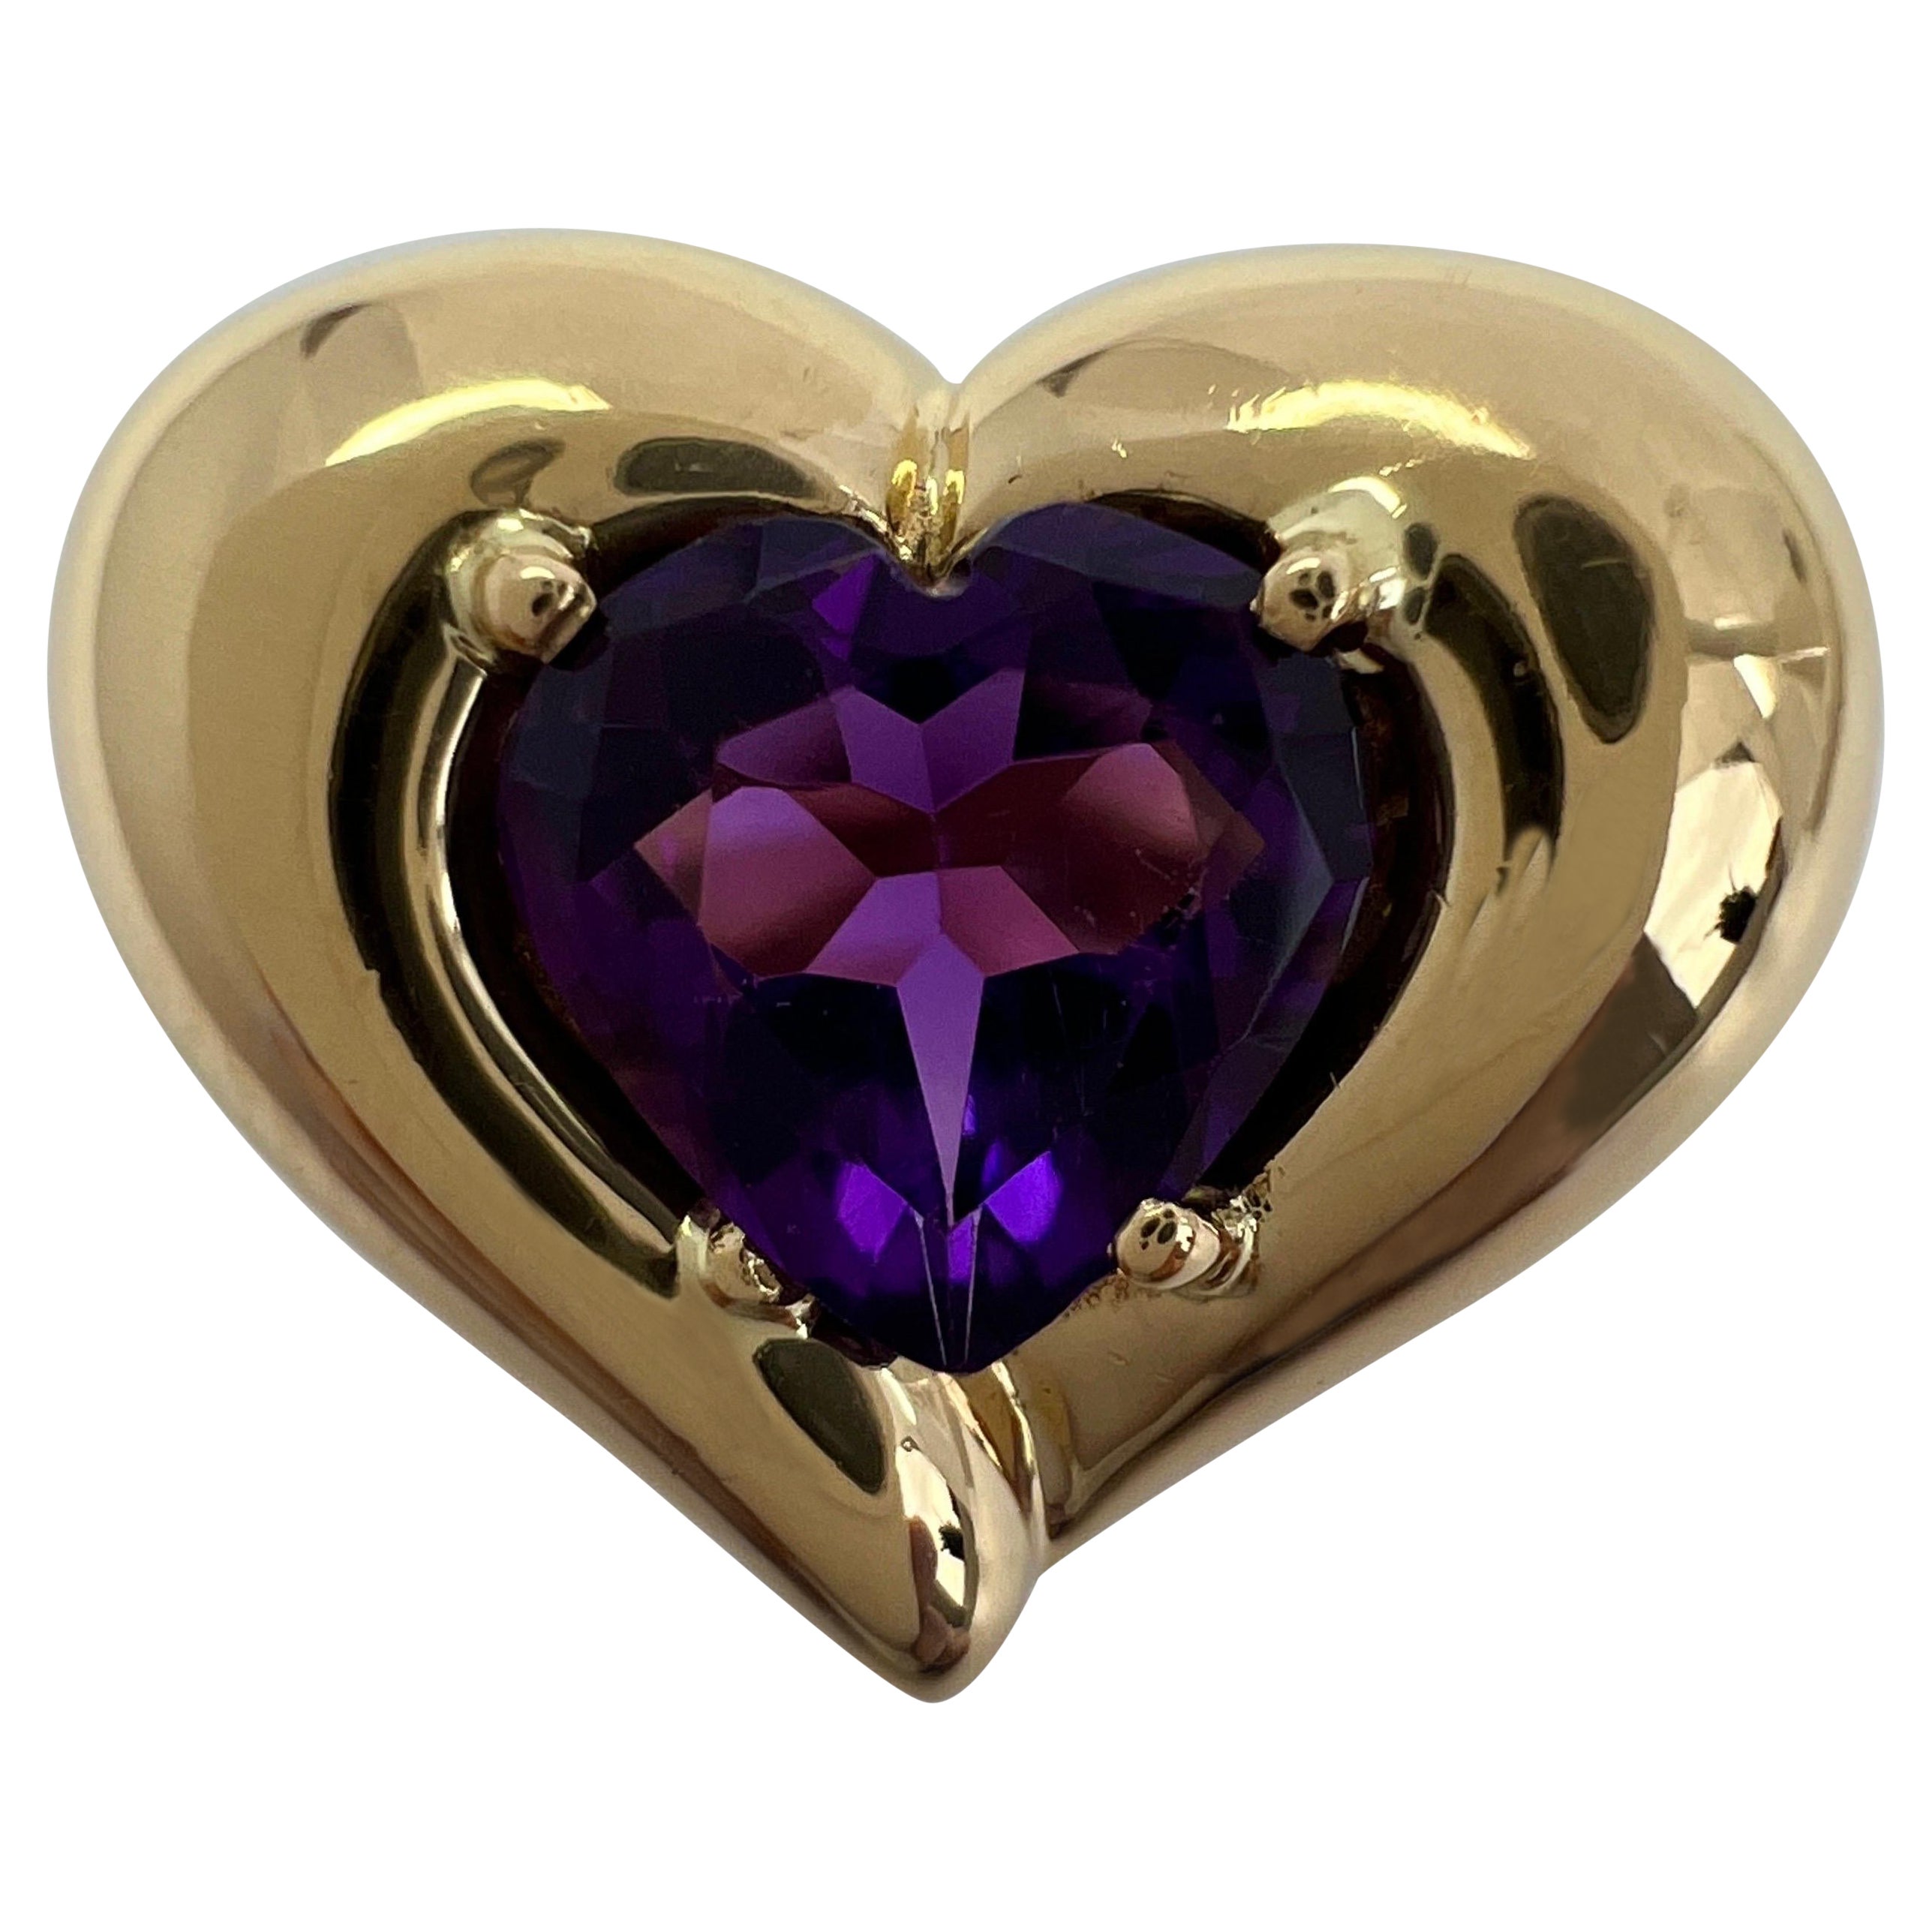 Rare Vintage Van Cleef & Arpels 18k Yellow Gold Amethyst Heart Ring with Box